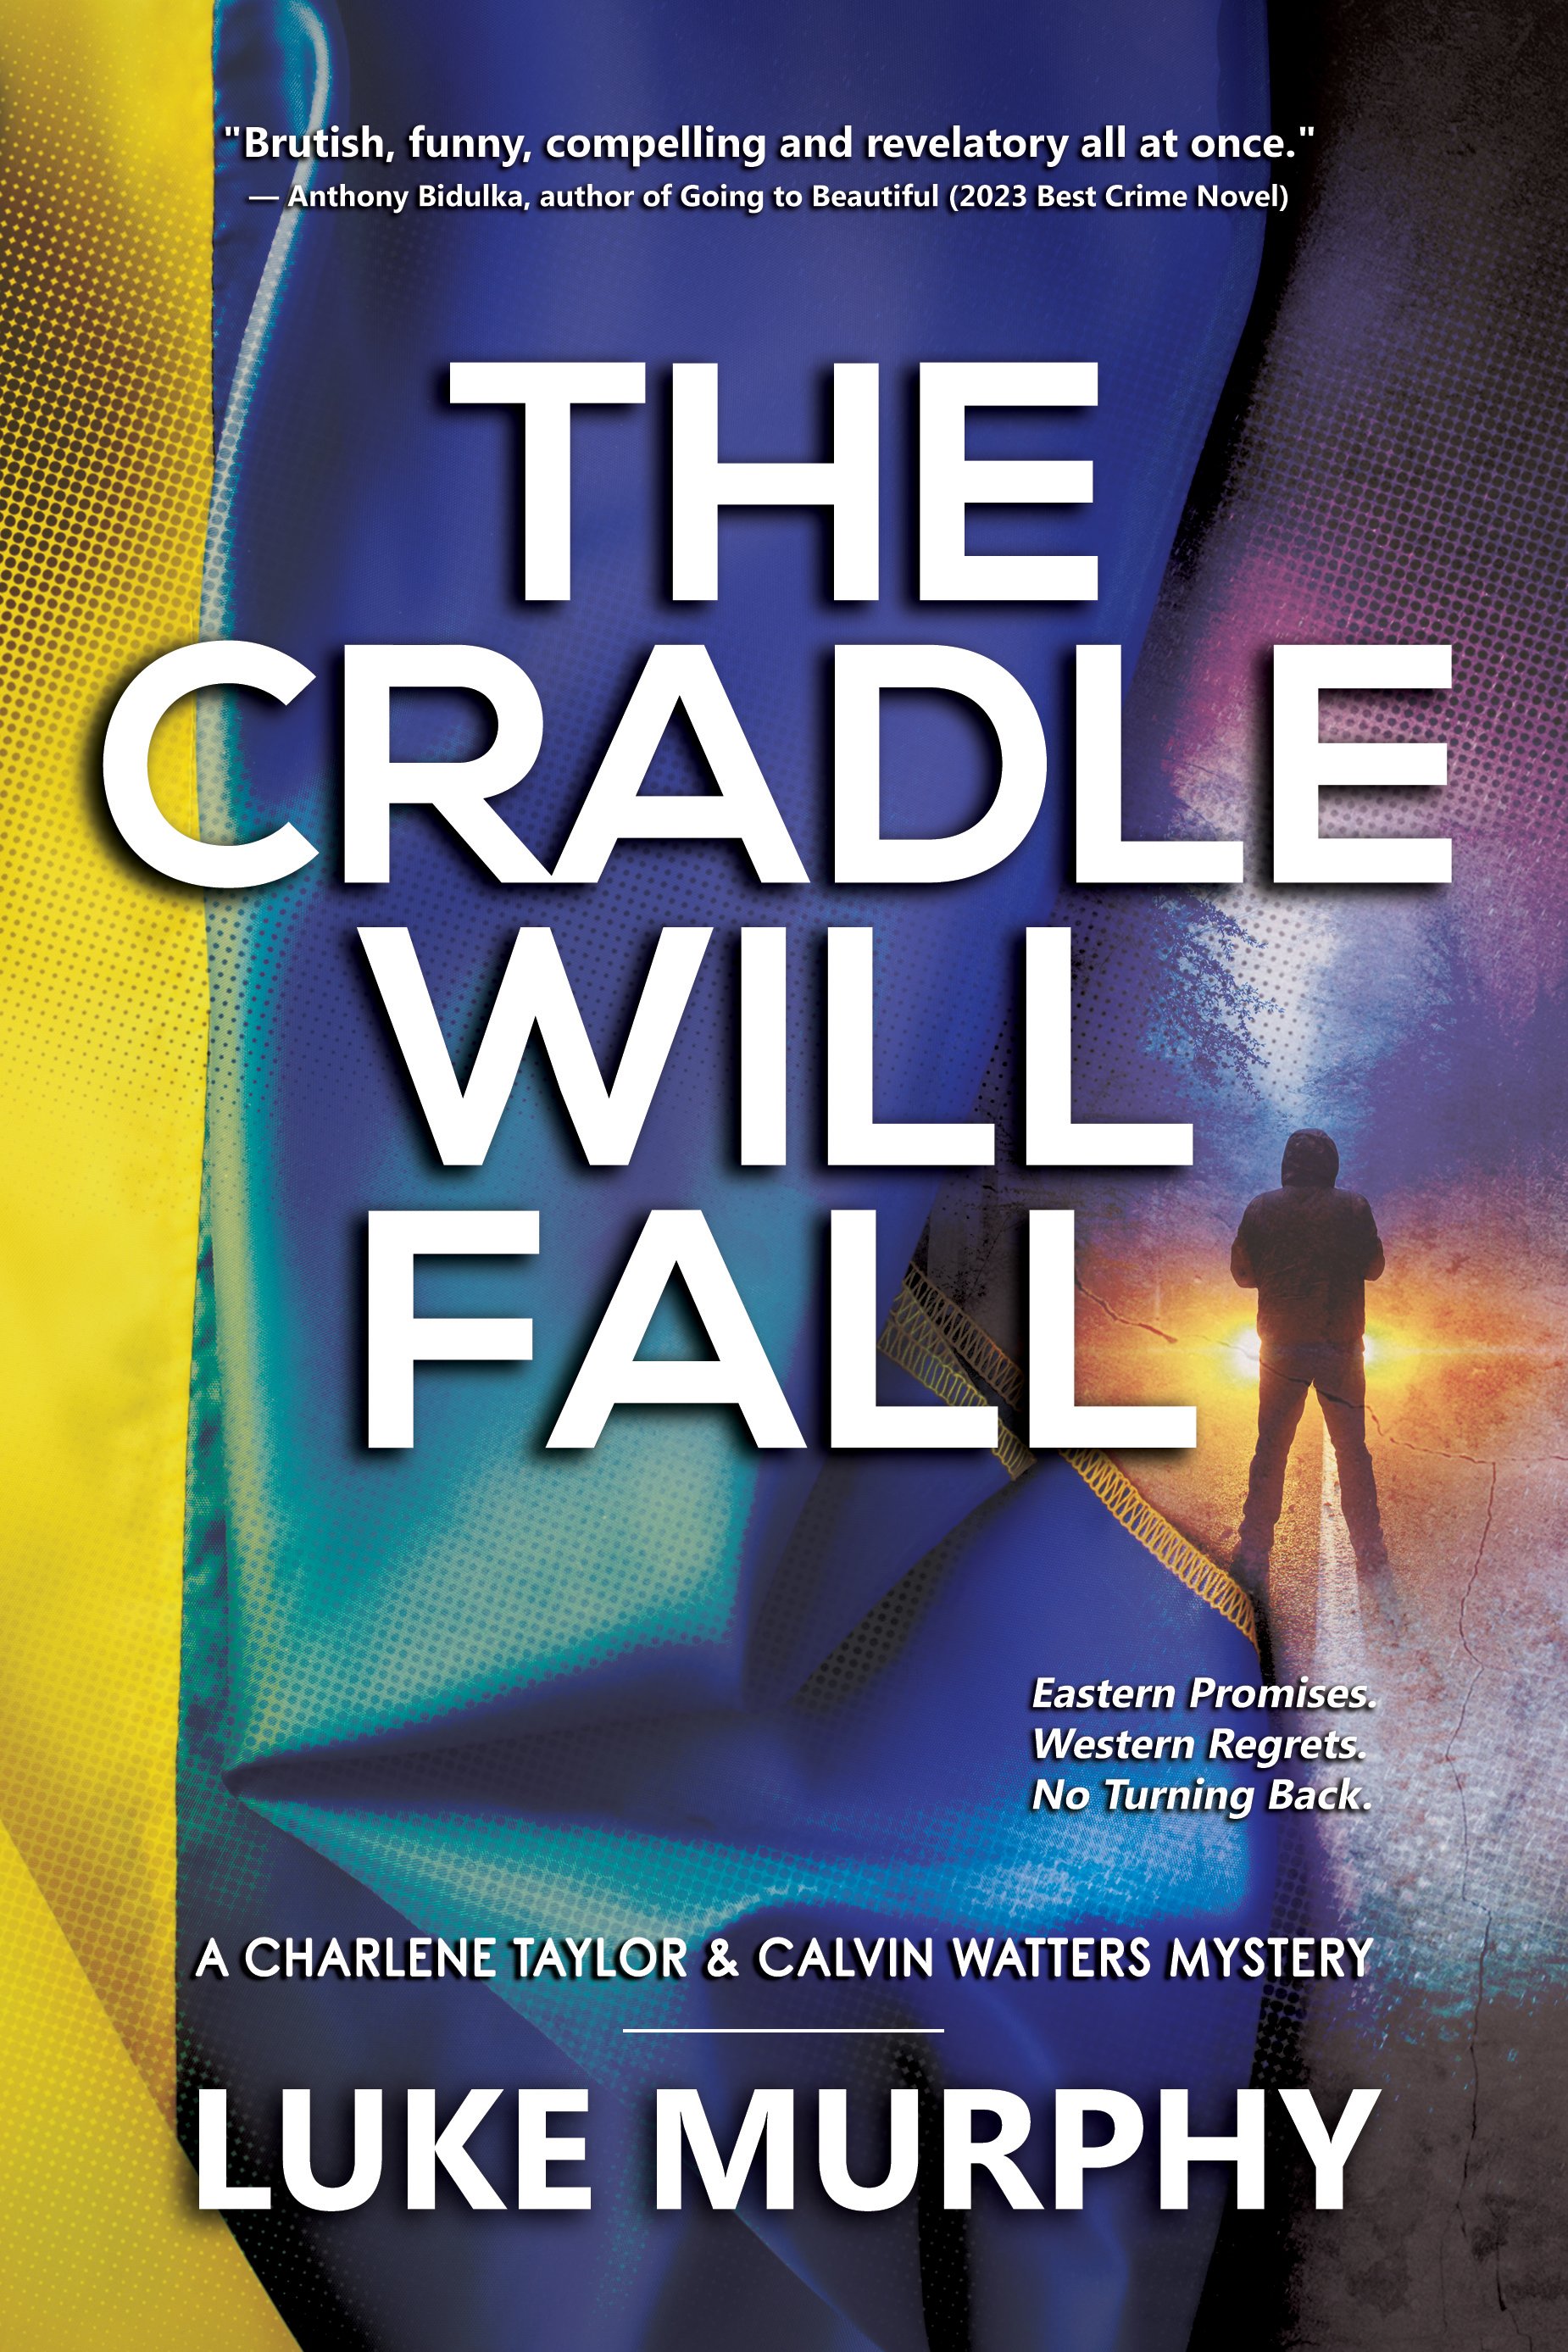 101ca Lukes Book Amazon Layout - The Cradle Will Fall - Final Front Cover (2).jpg (Copy) (Copy)